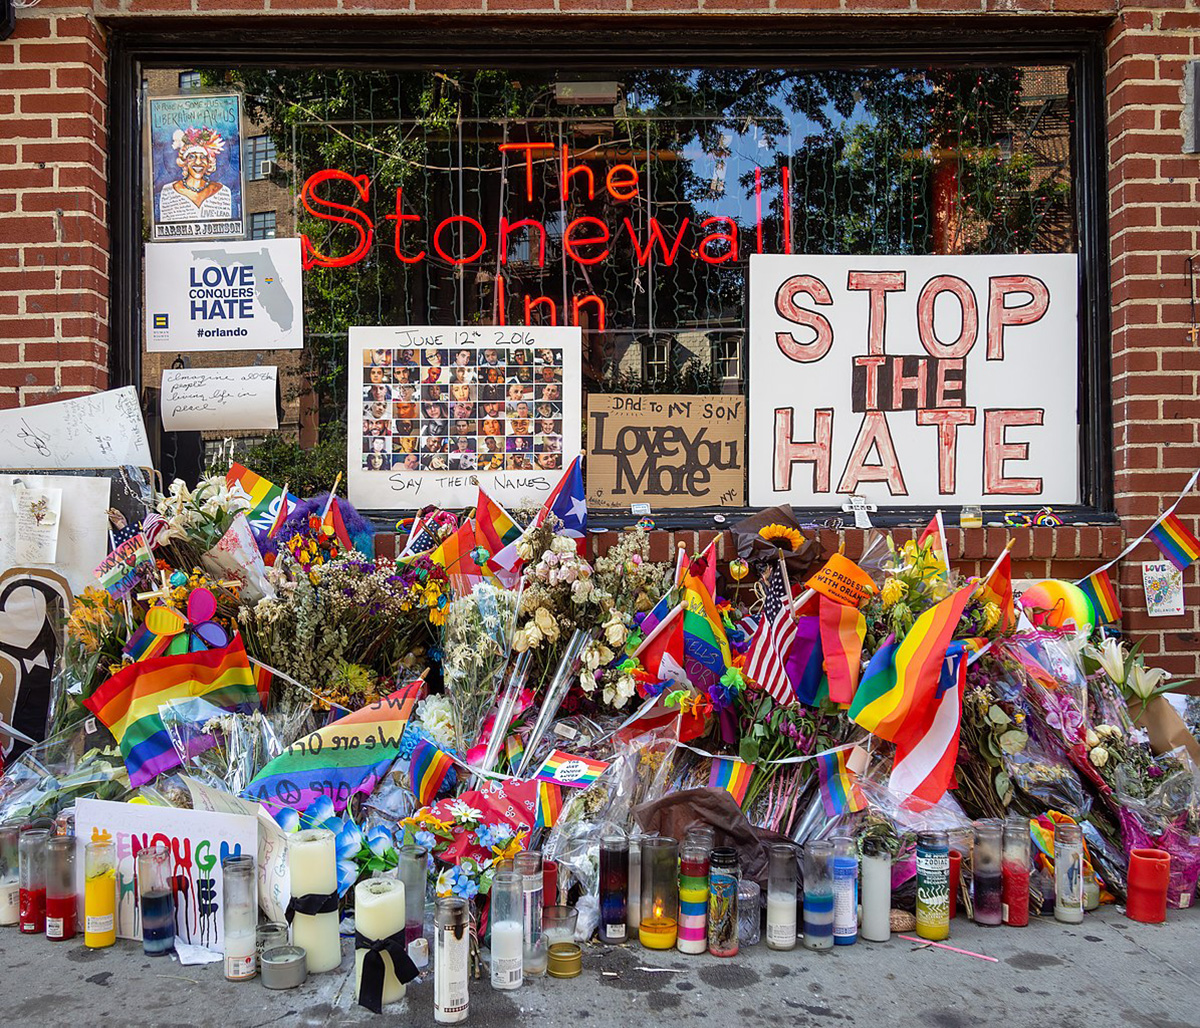 Stonewall Inn, a gay bar on Christopher Street in Manhattan's Greenwich Village, festooned with flowers and signs as part of Pride celebrations in 2018